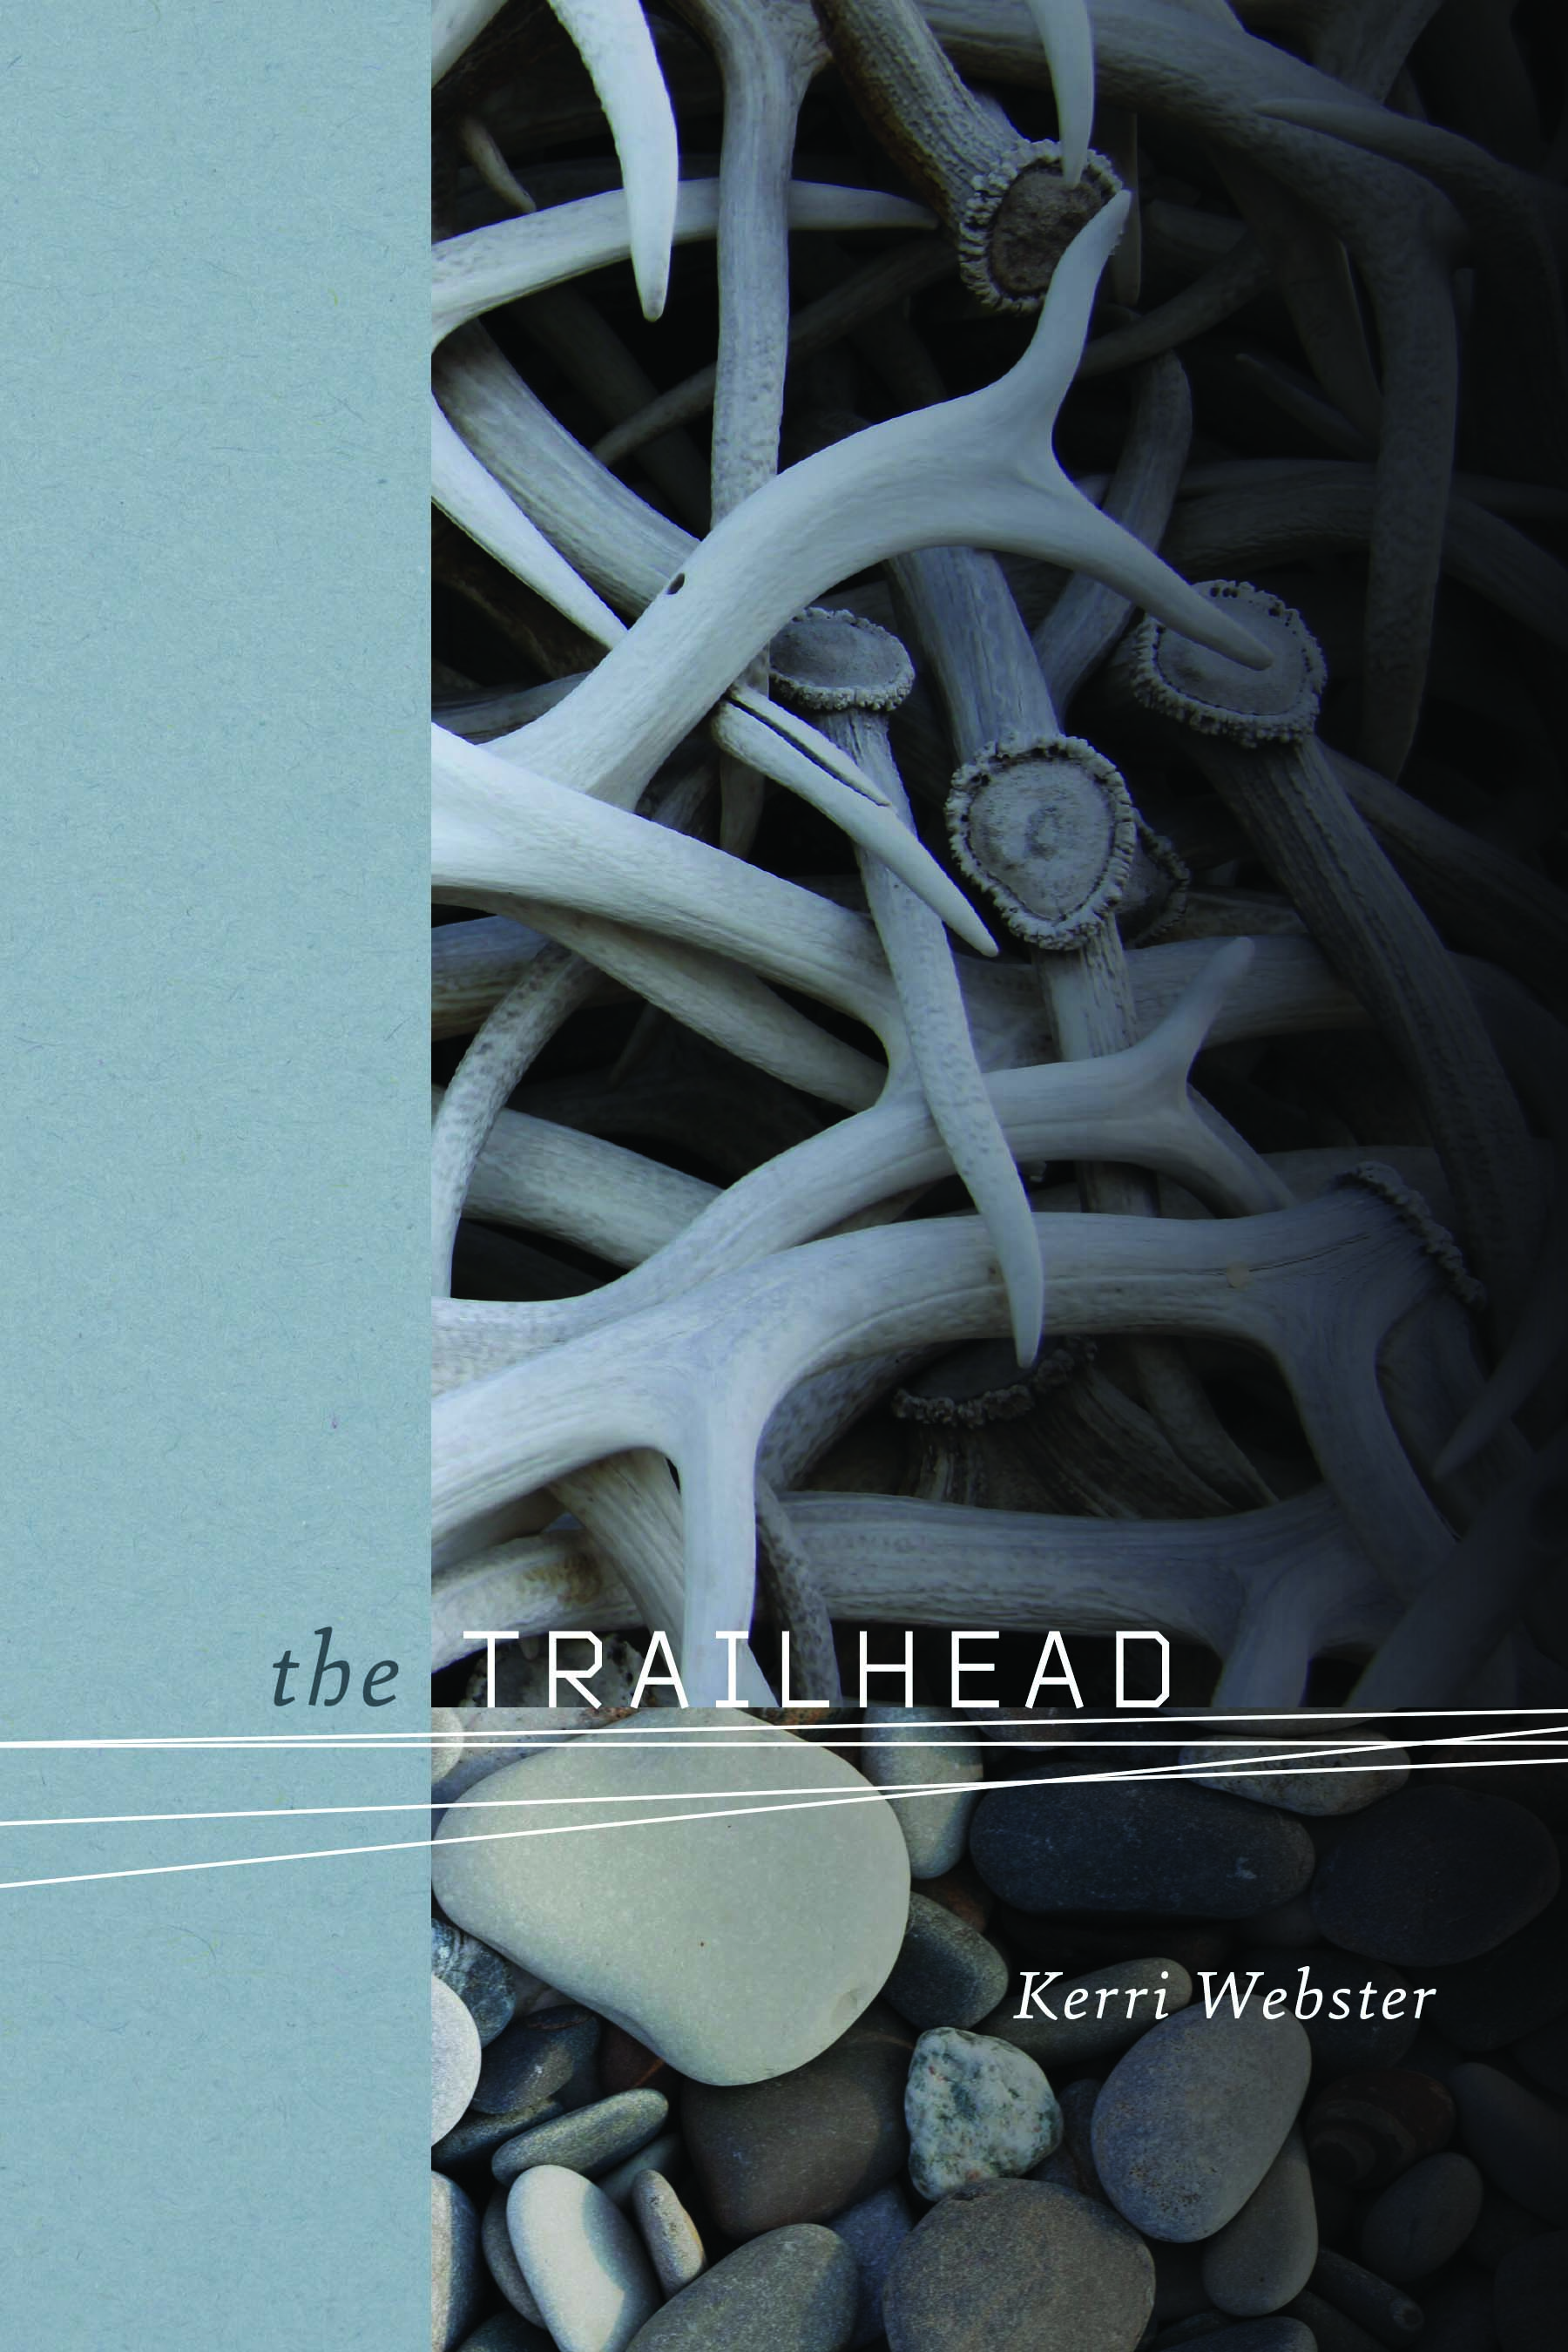 Book Cover for The Trailhead by Kerri Webster